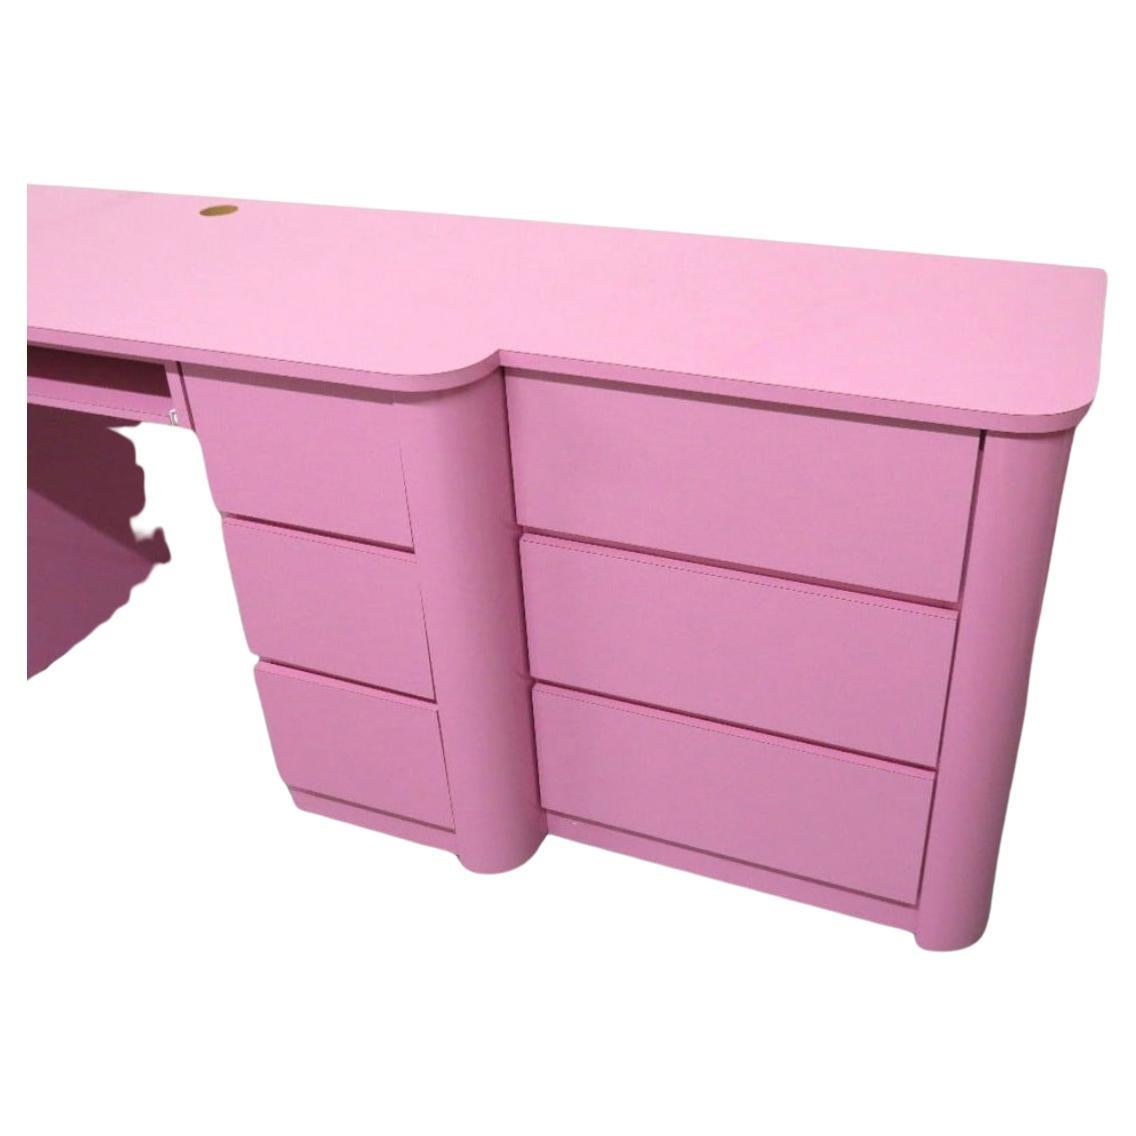 Beautiful post modern custom made bubblegum pink gloss laminate 9 drawer kneehole Desk dresser or credenza circa 1980. Very clean inside and out almost like new. Look at photos. There is (3) drawers on the left and (6) drawers on the right with a